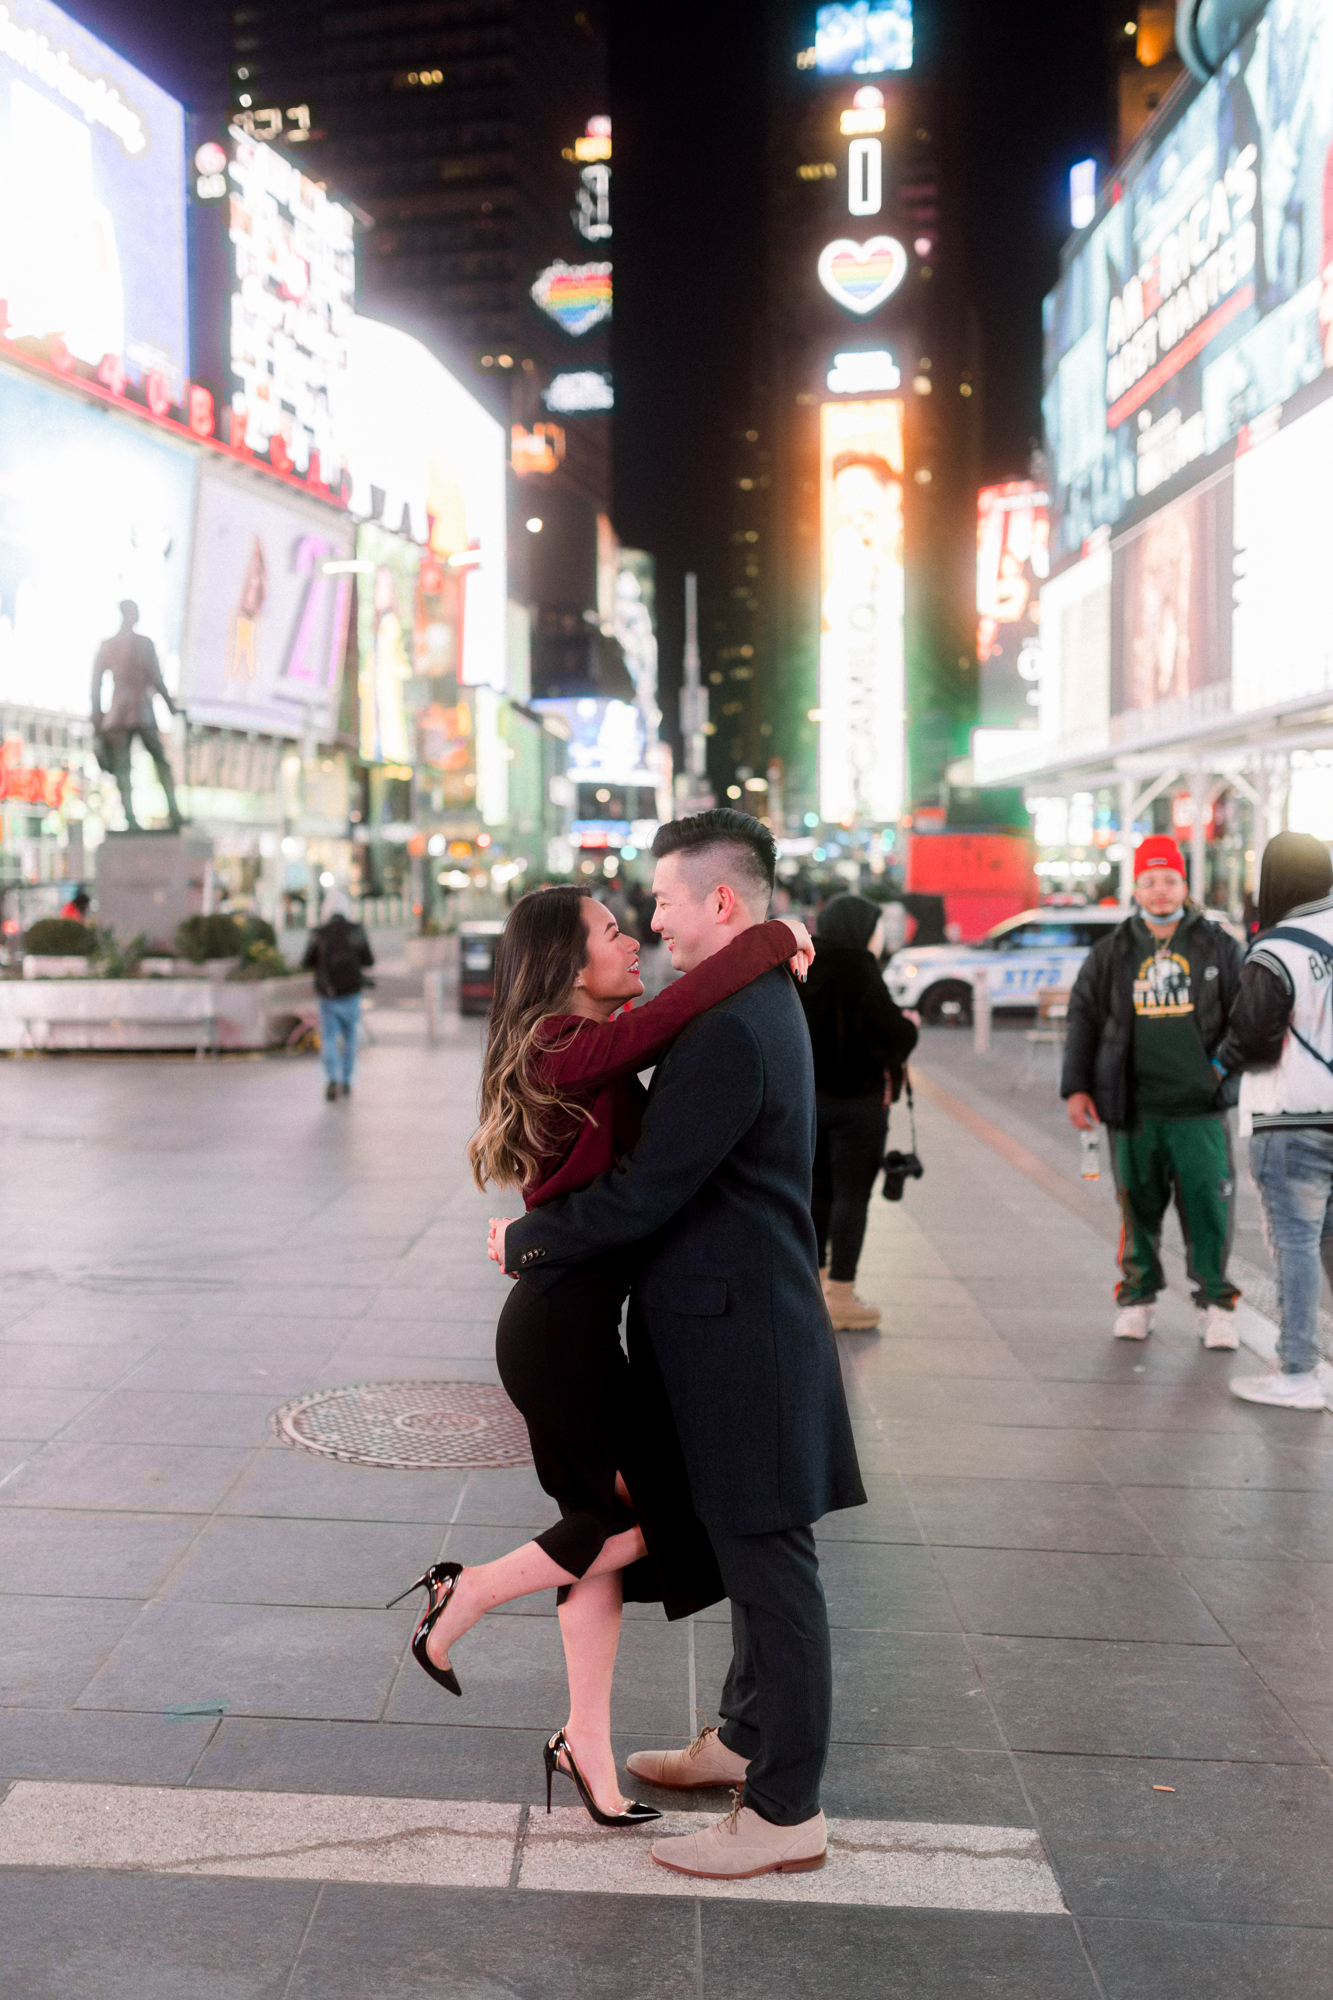 Sweet Nighttime Winter Engagement Photos in New York's Iconic Times Square